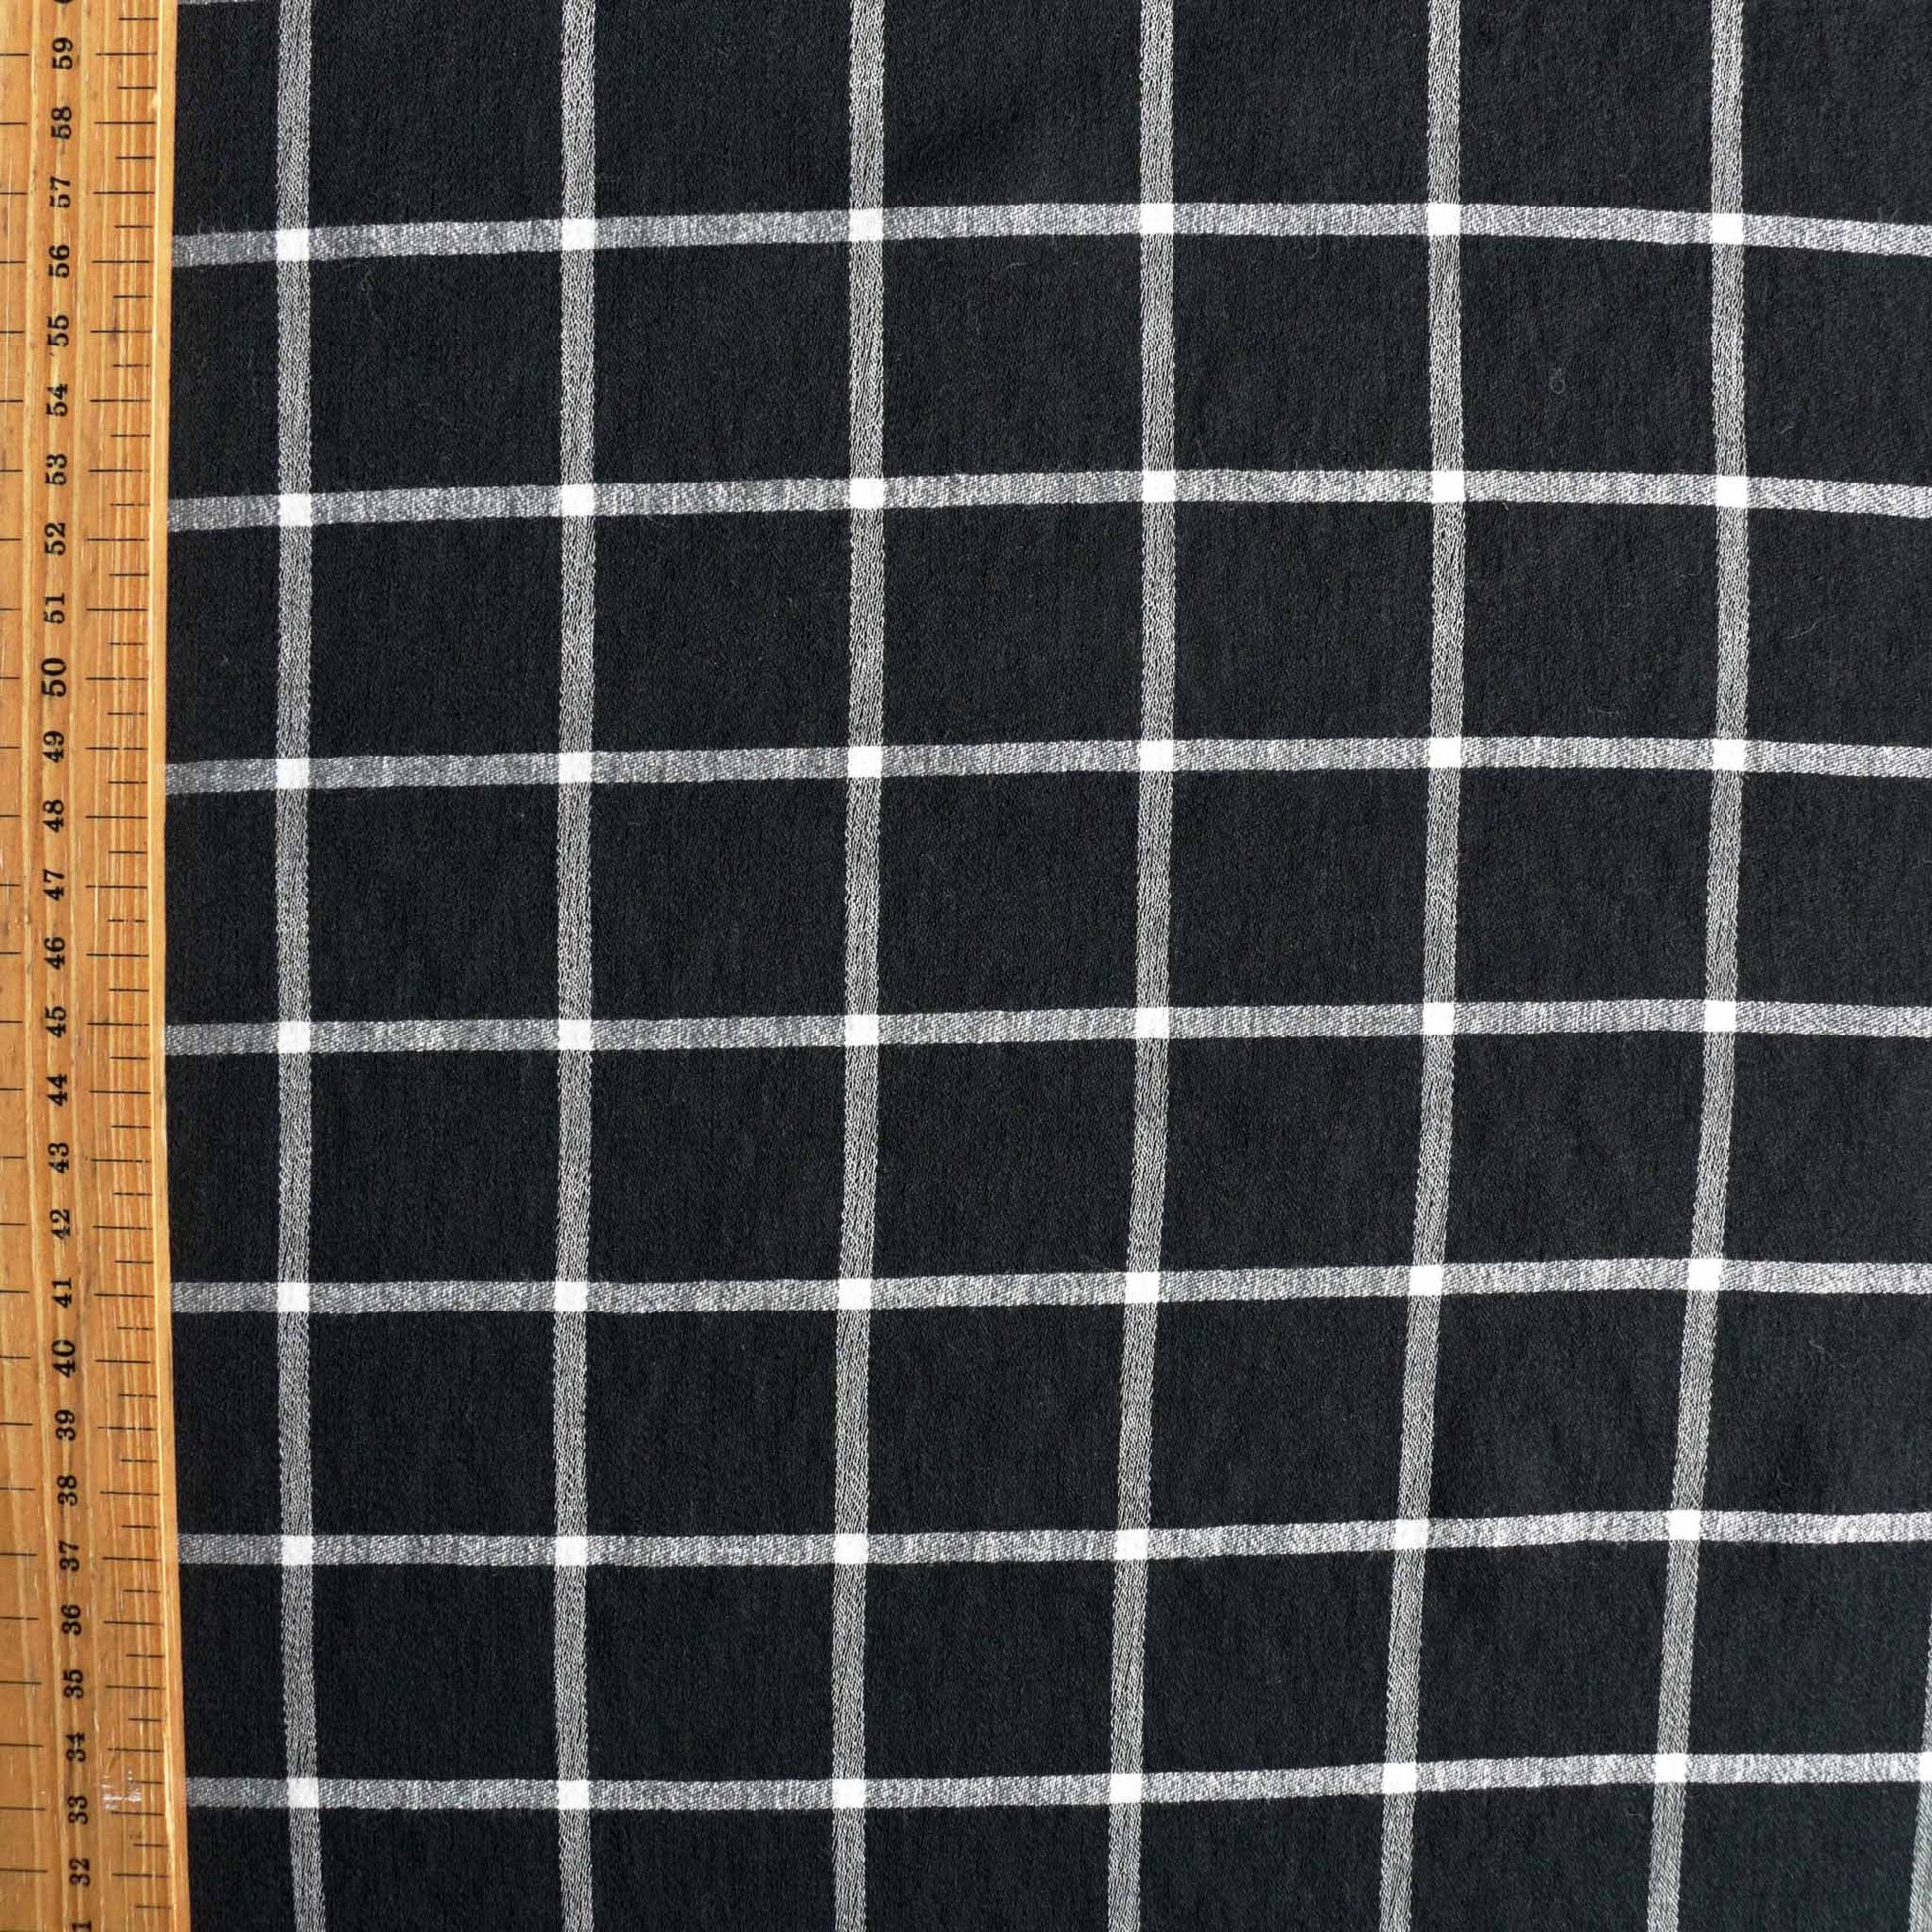 metre viscose rayon lawn dressmaking fabric with black and white check pattern